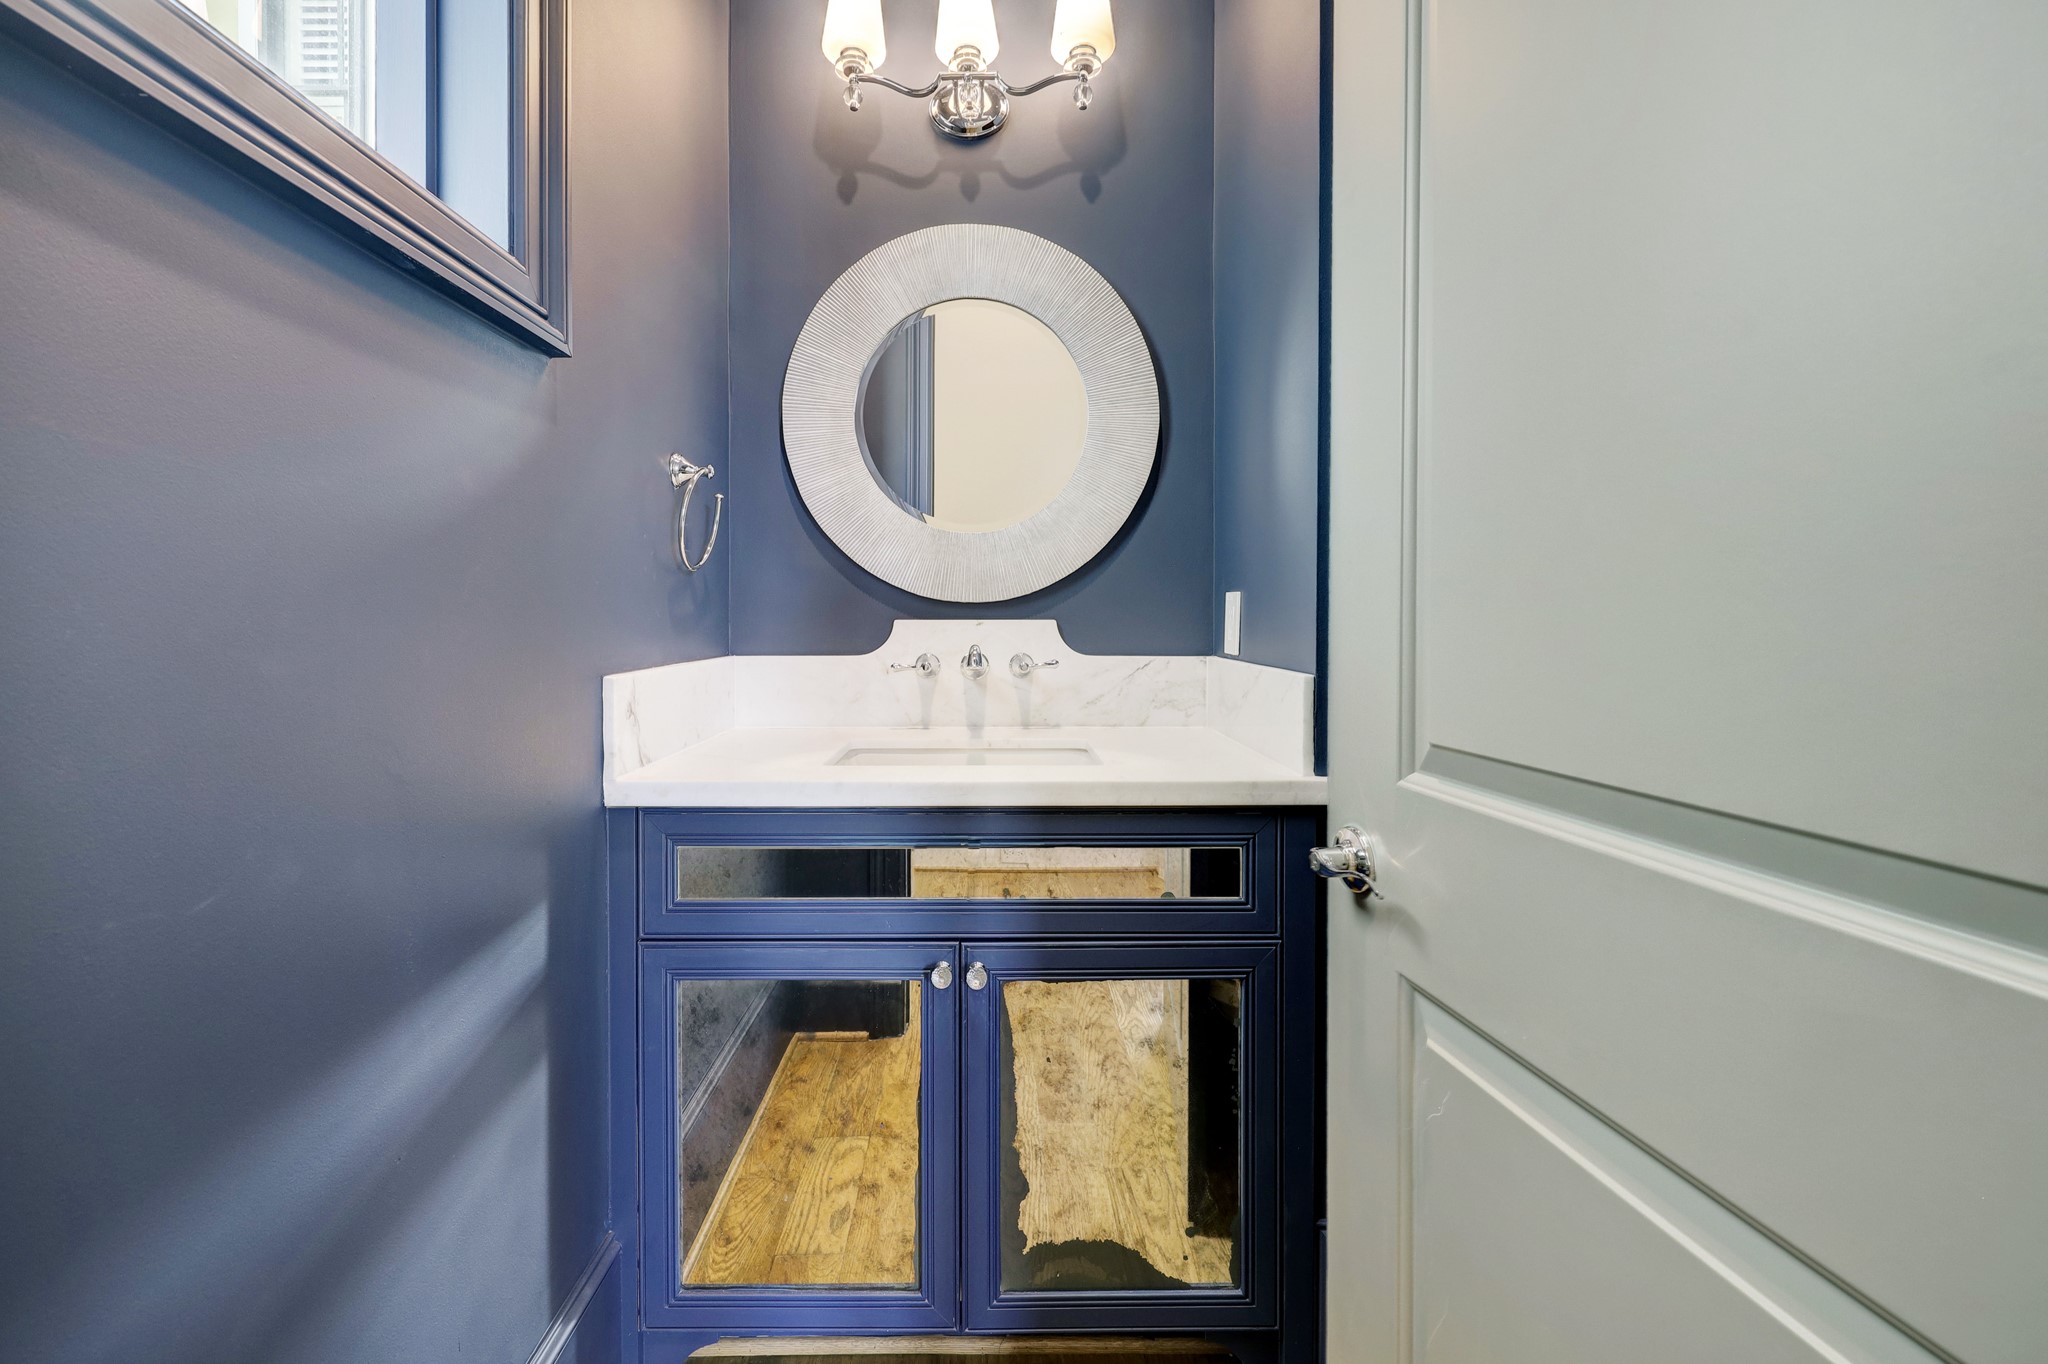 The formal powder bathroom features wood flooring, wall-mounted sconces, and a beautiful built-in vanity chest.